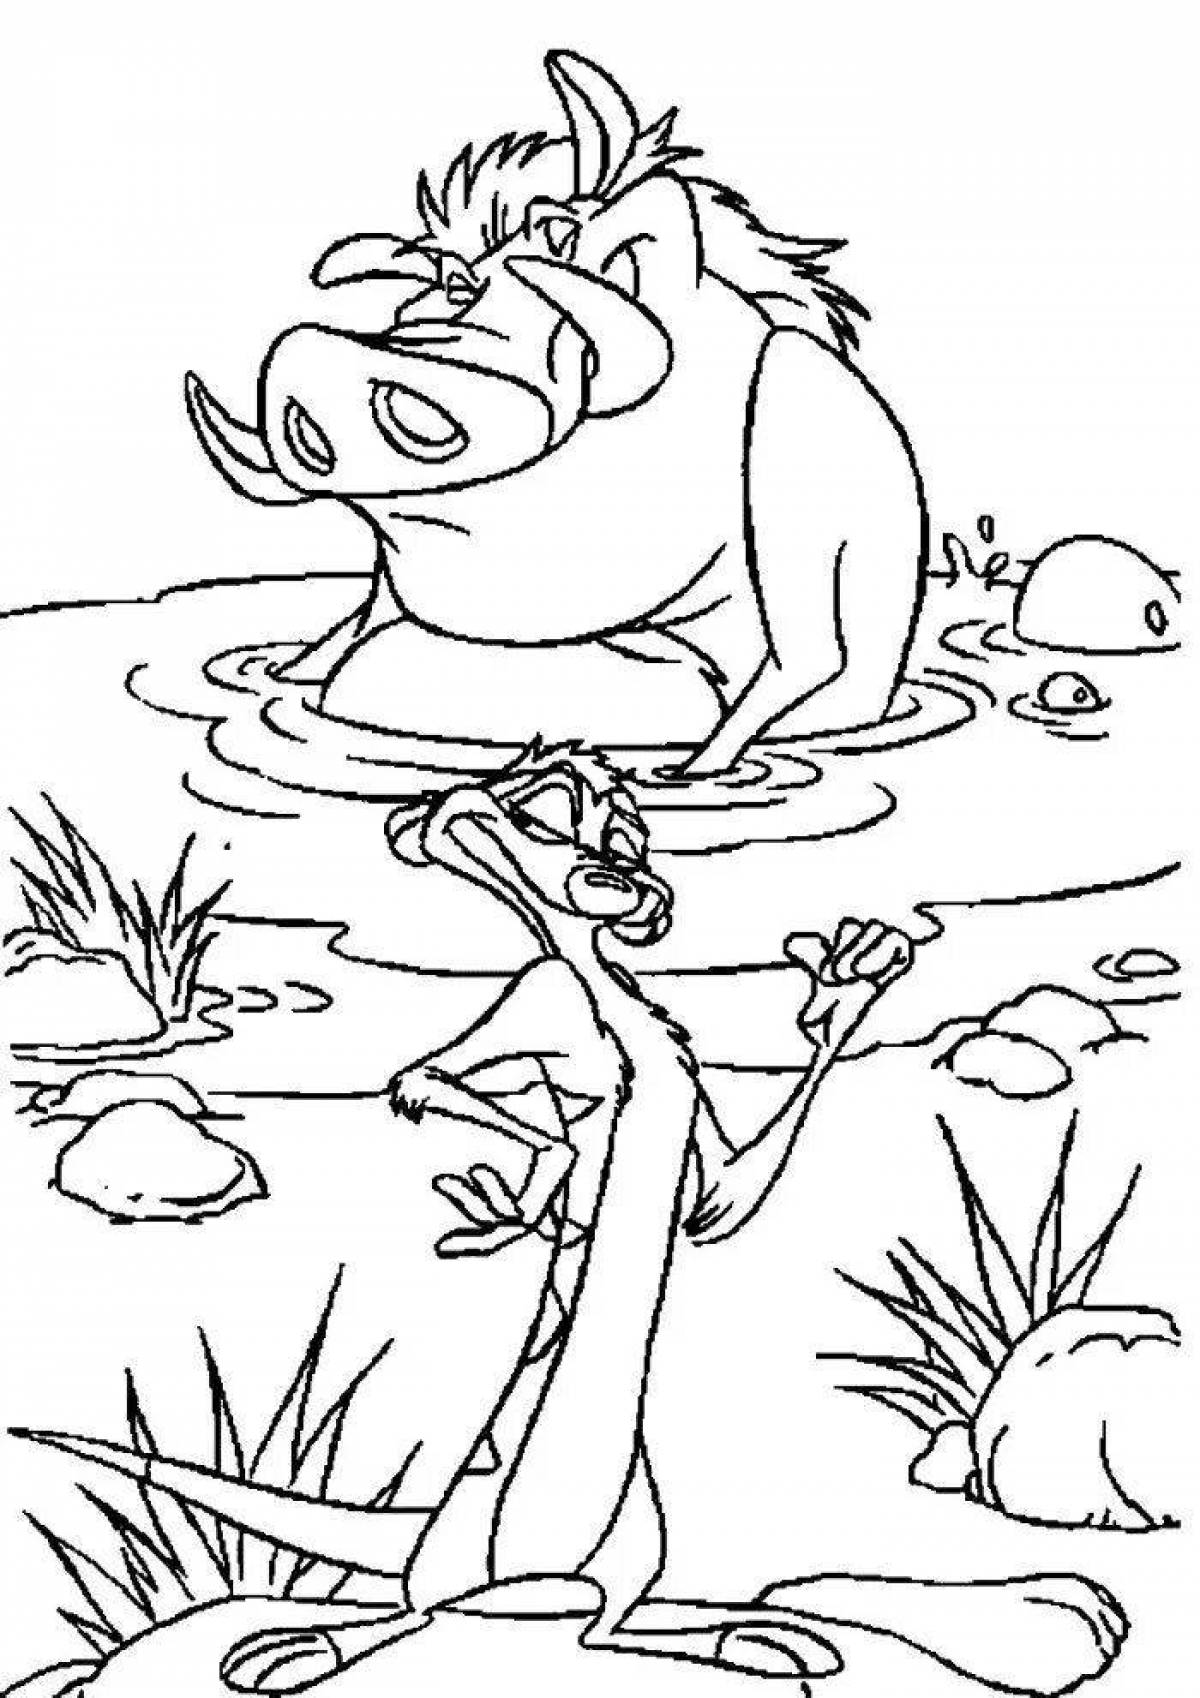 Timon and Pumbaa coloring page